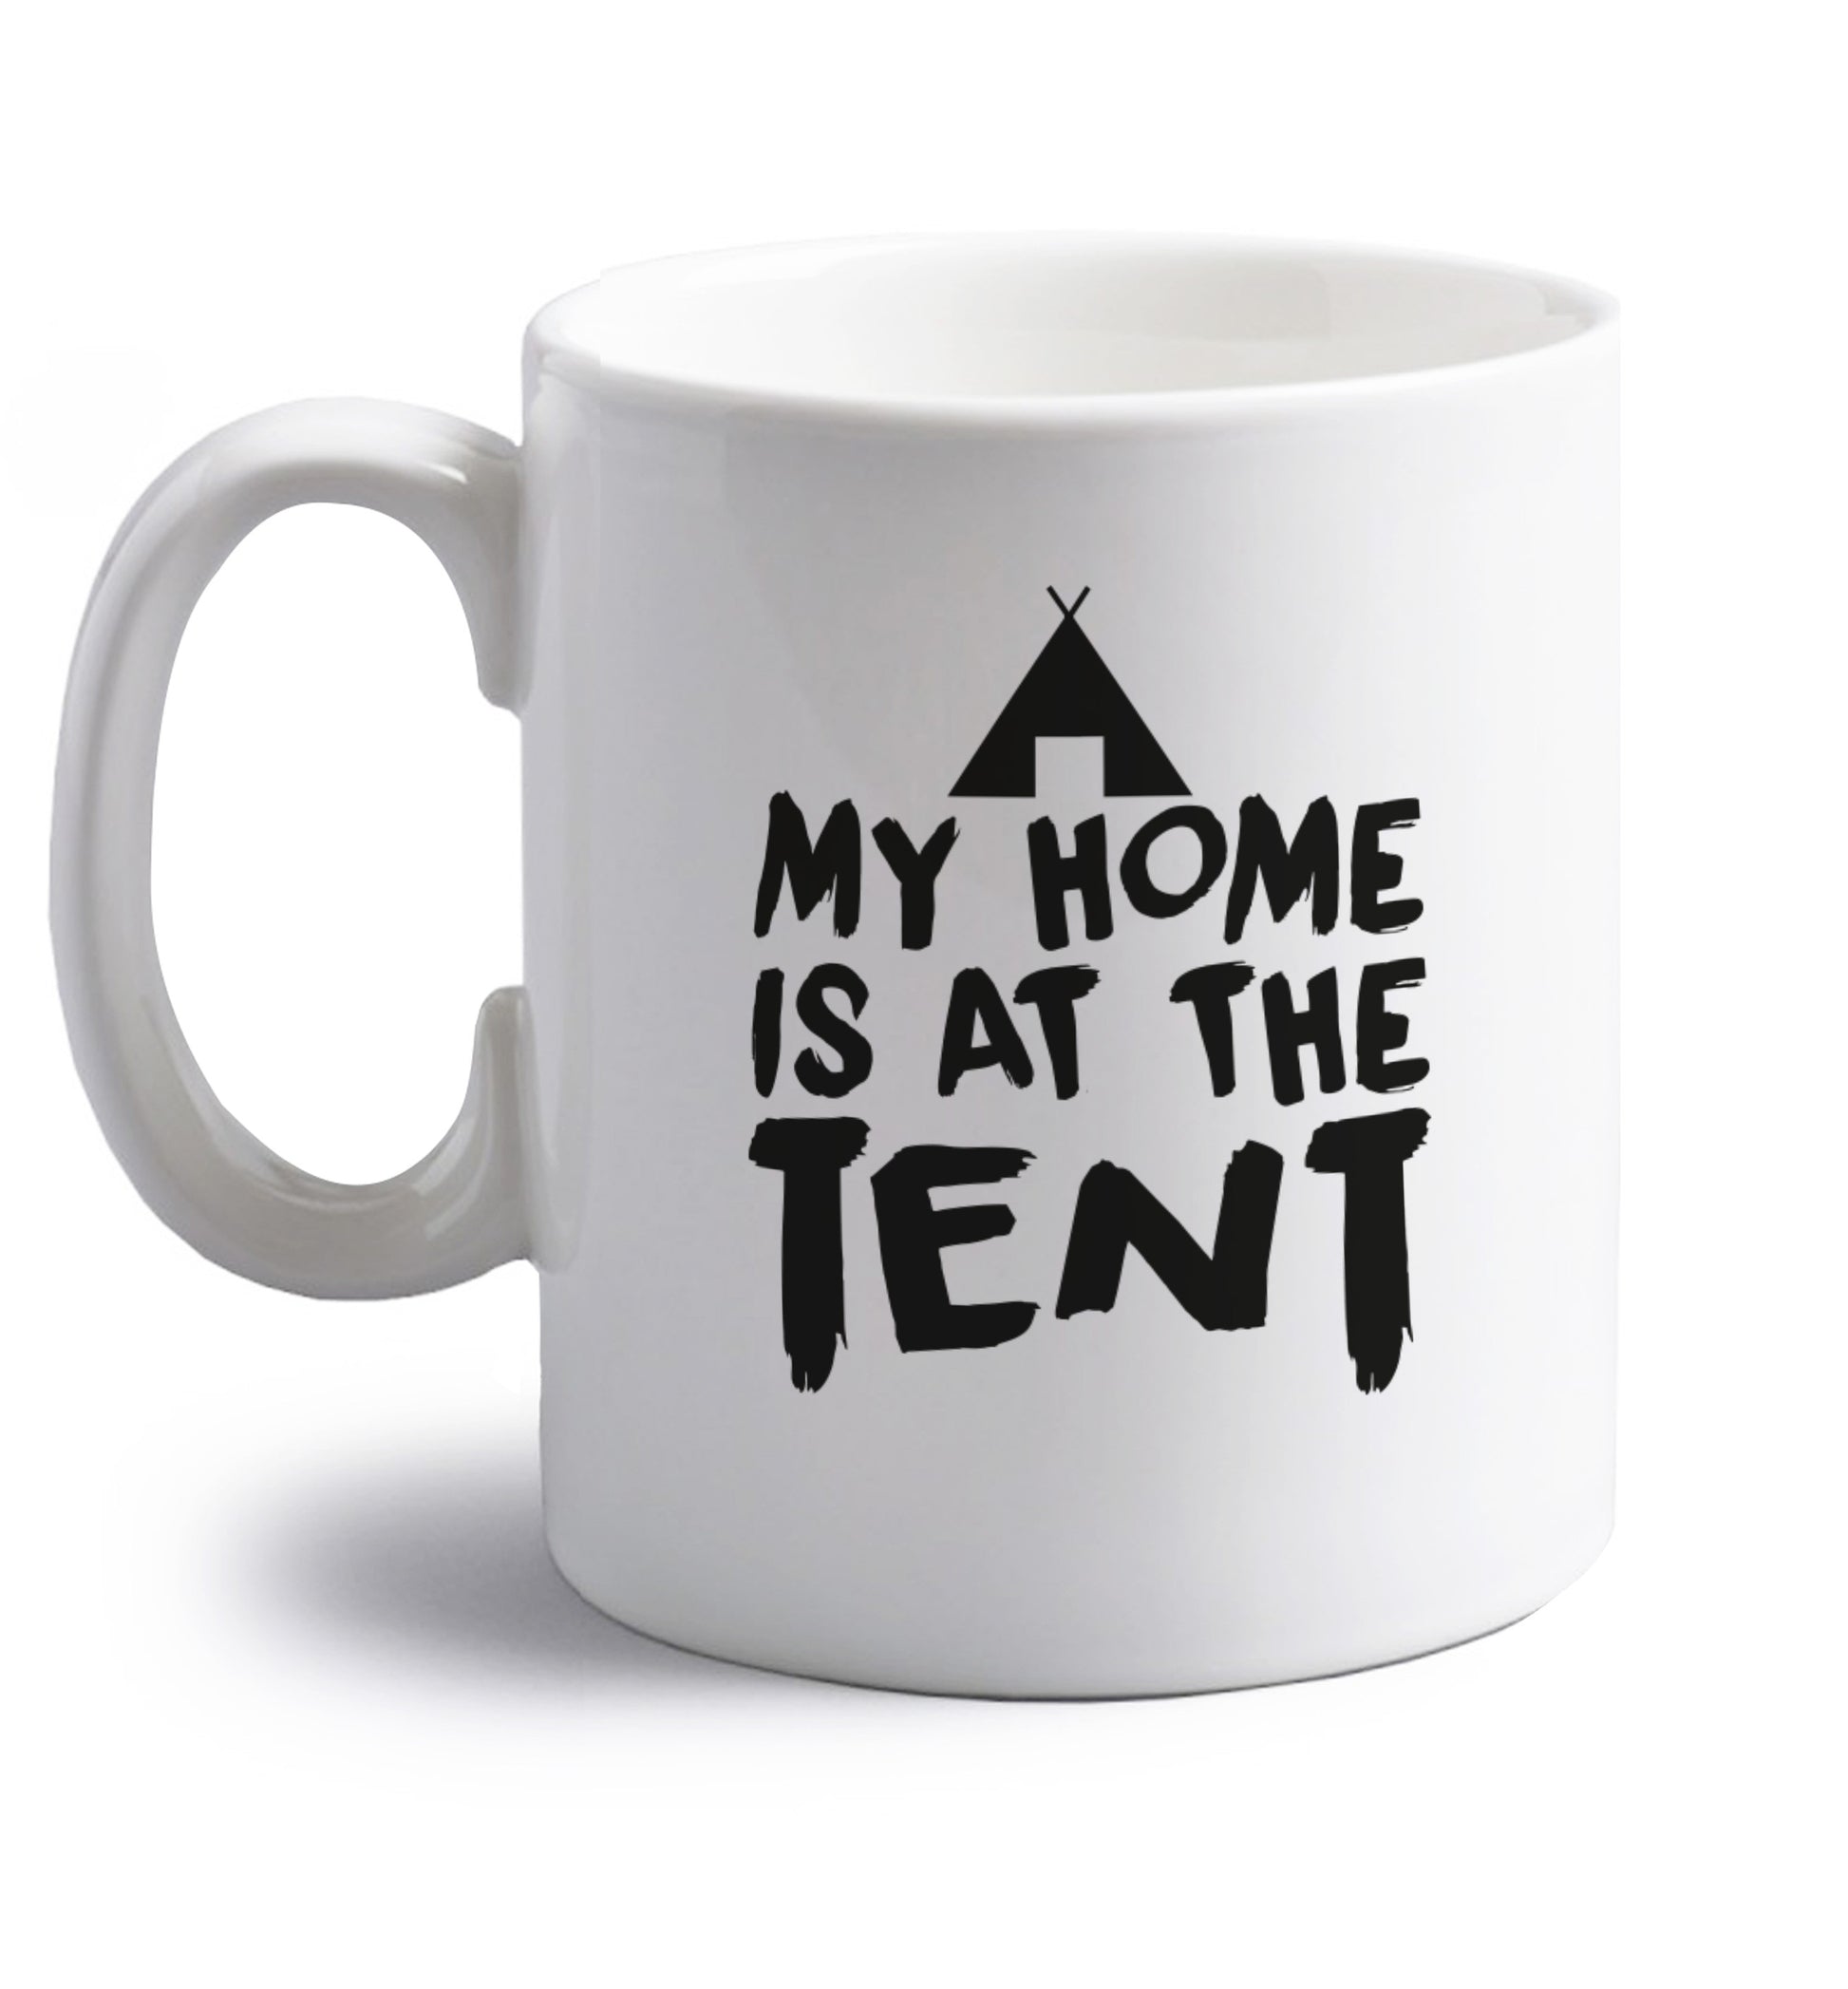 My home is at the tent right handed white ceramic mug 